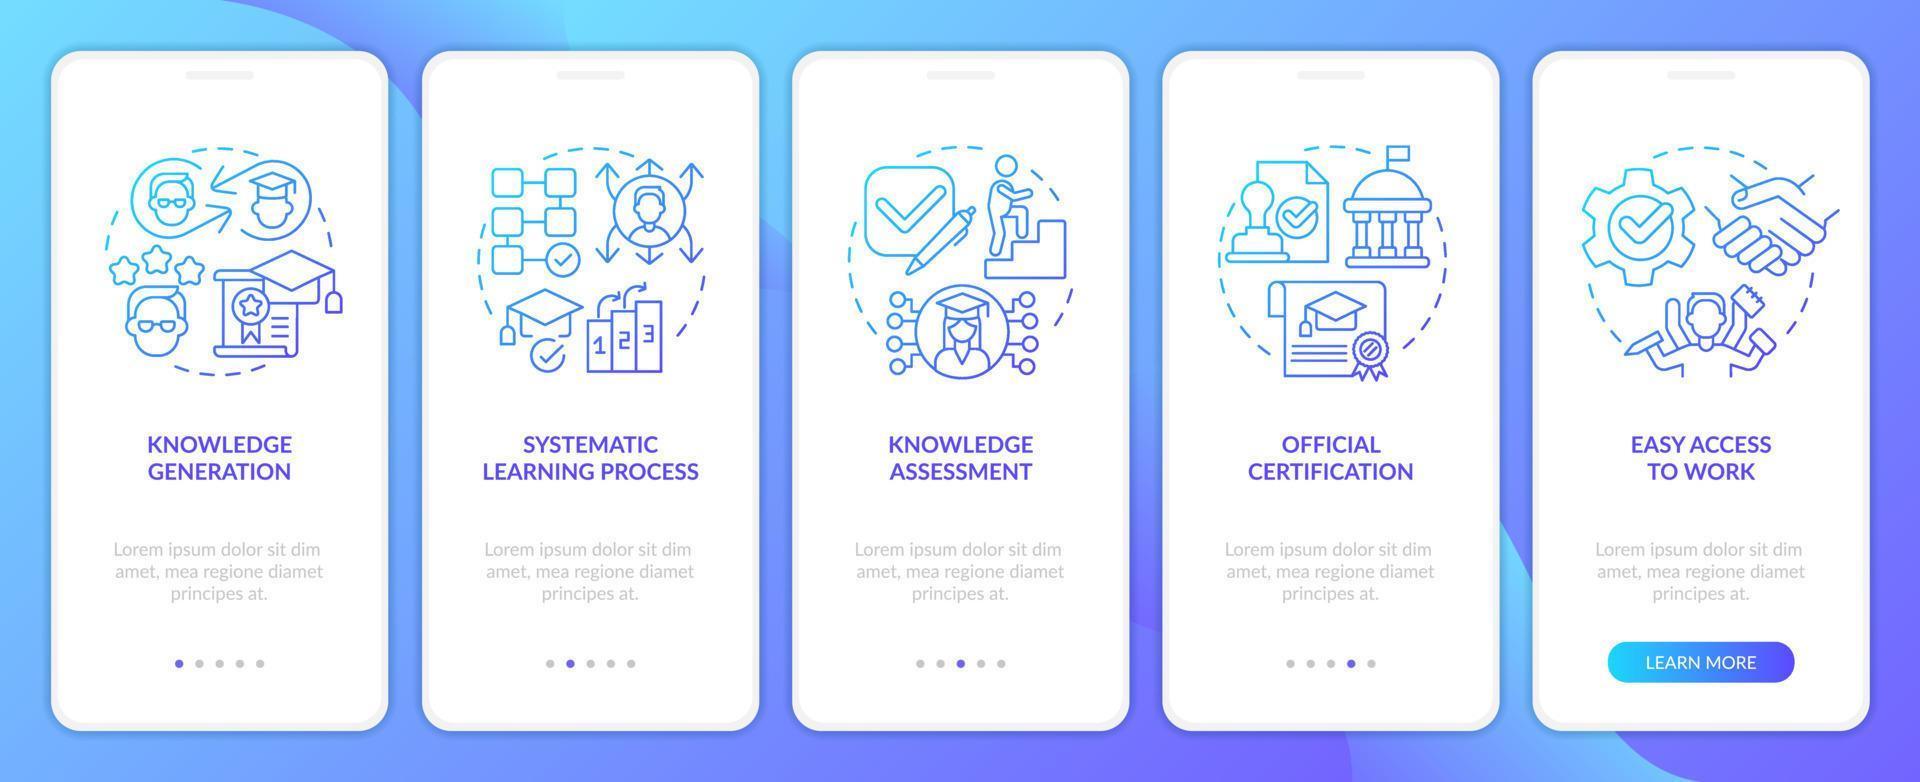 Advantages of formal education blue gradient onboarding mobile app screen. Walkthrough 5 steps graphic instructions with linear concepts. UI, UX, GUI template vector